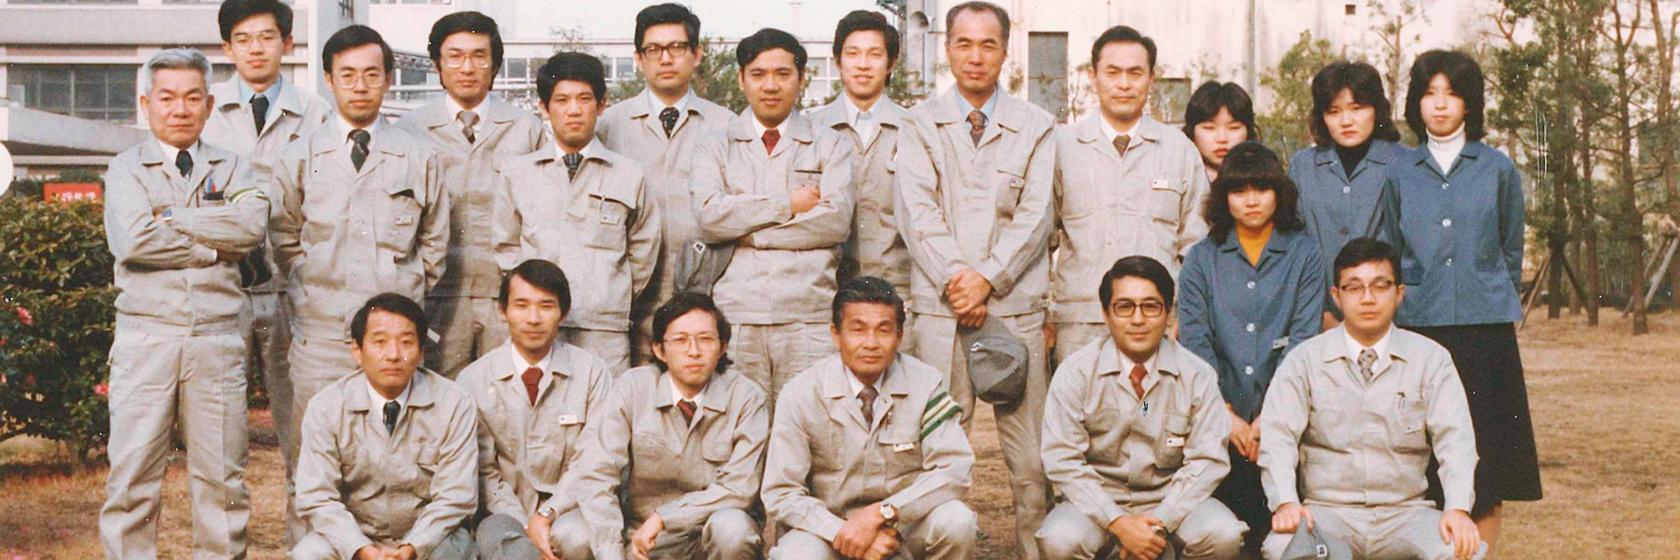 Group photo with colleagues at the Osaka Works. Okazaki is the third from the right in the front row. Kimura has his arms folded in the middle of the back row.